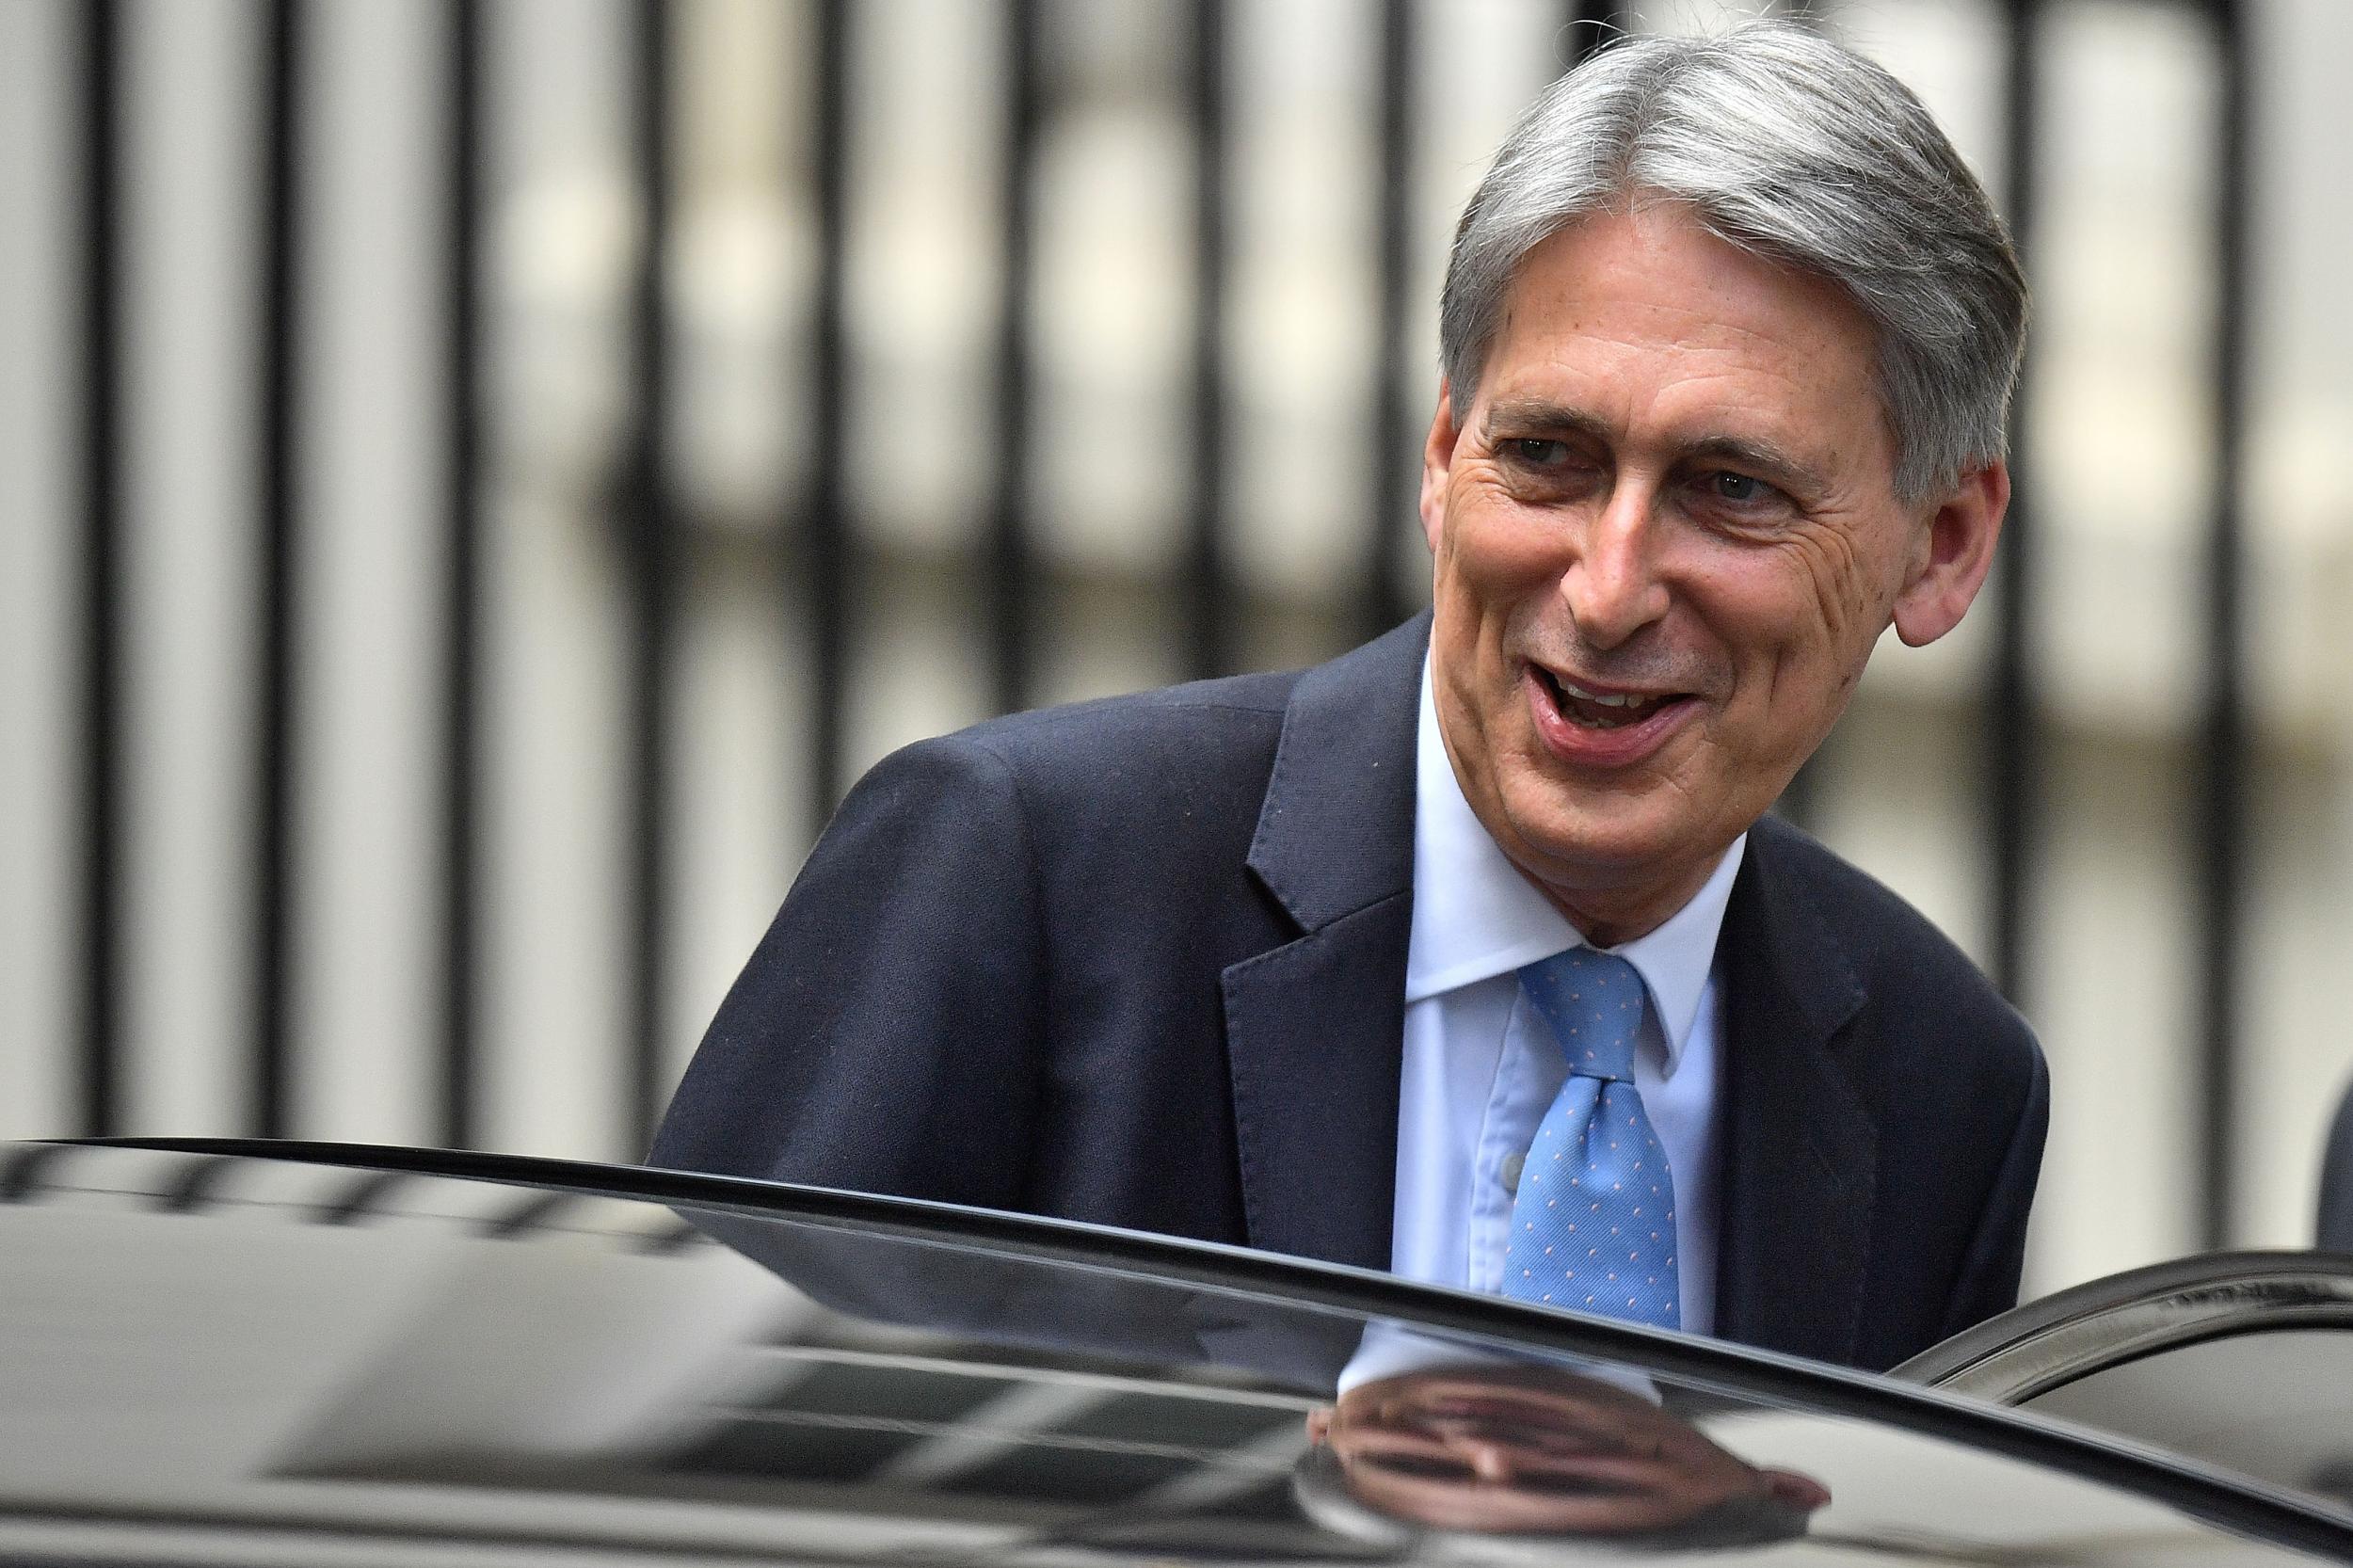 The Chancellor has emerged as a force for soft Brexit